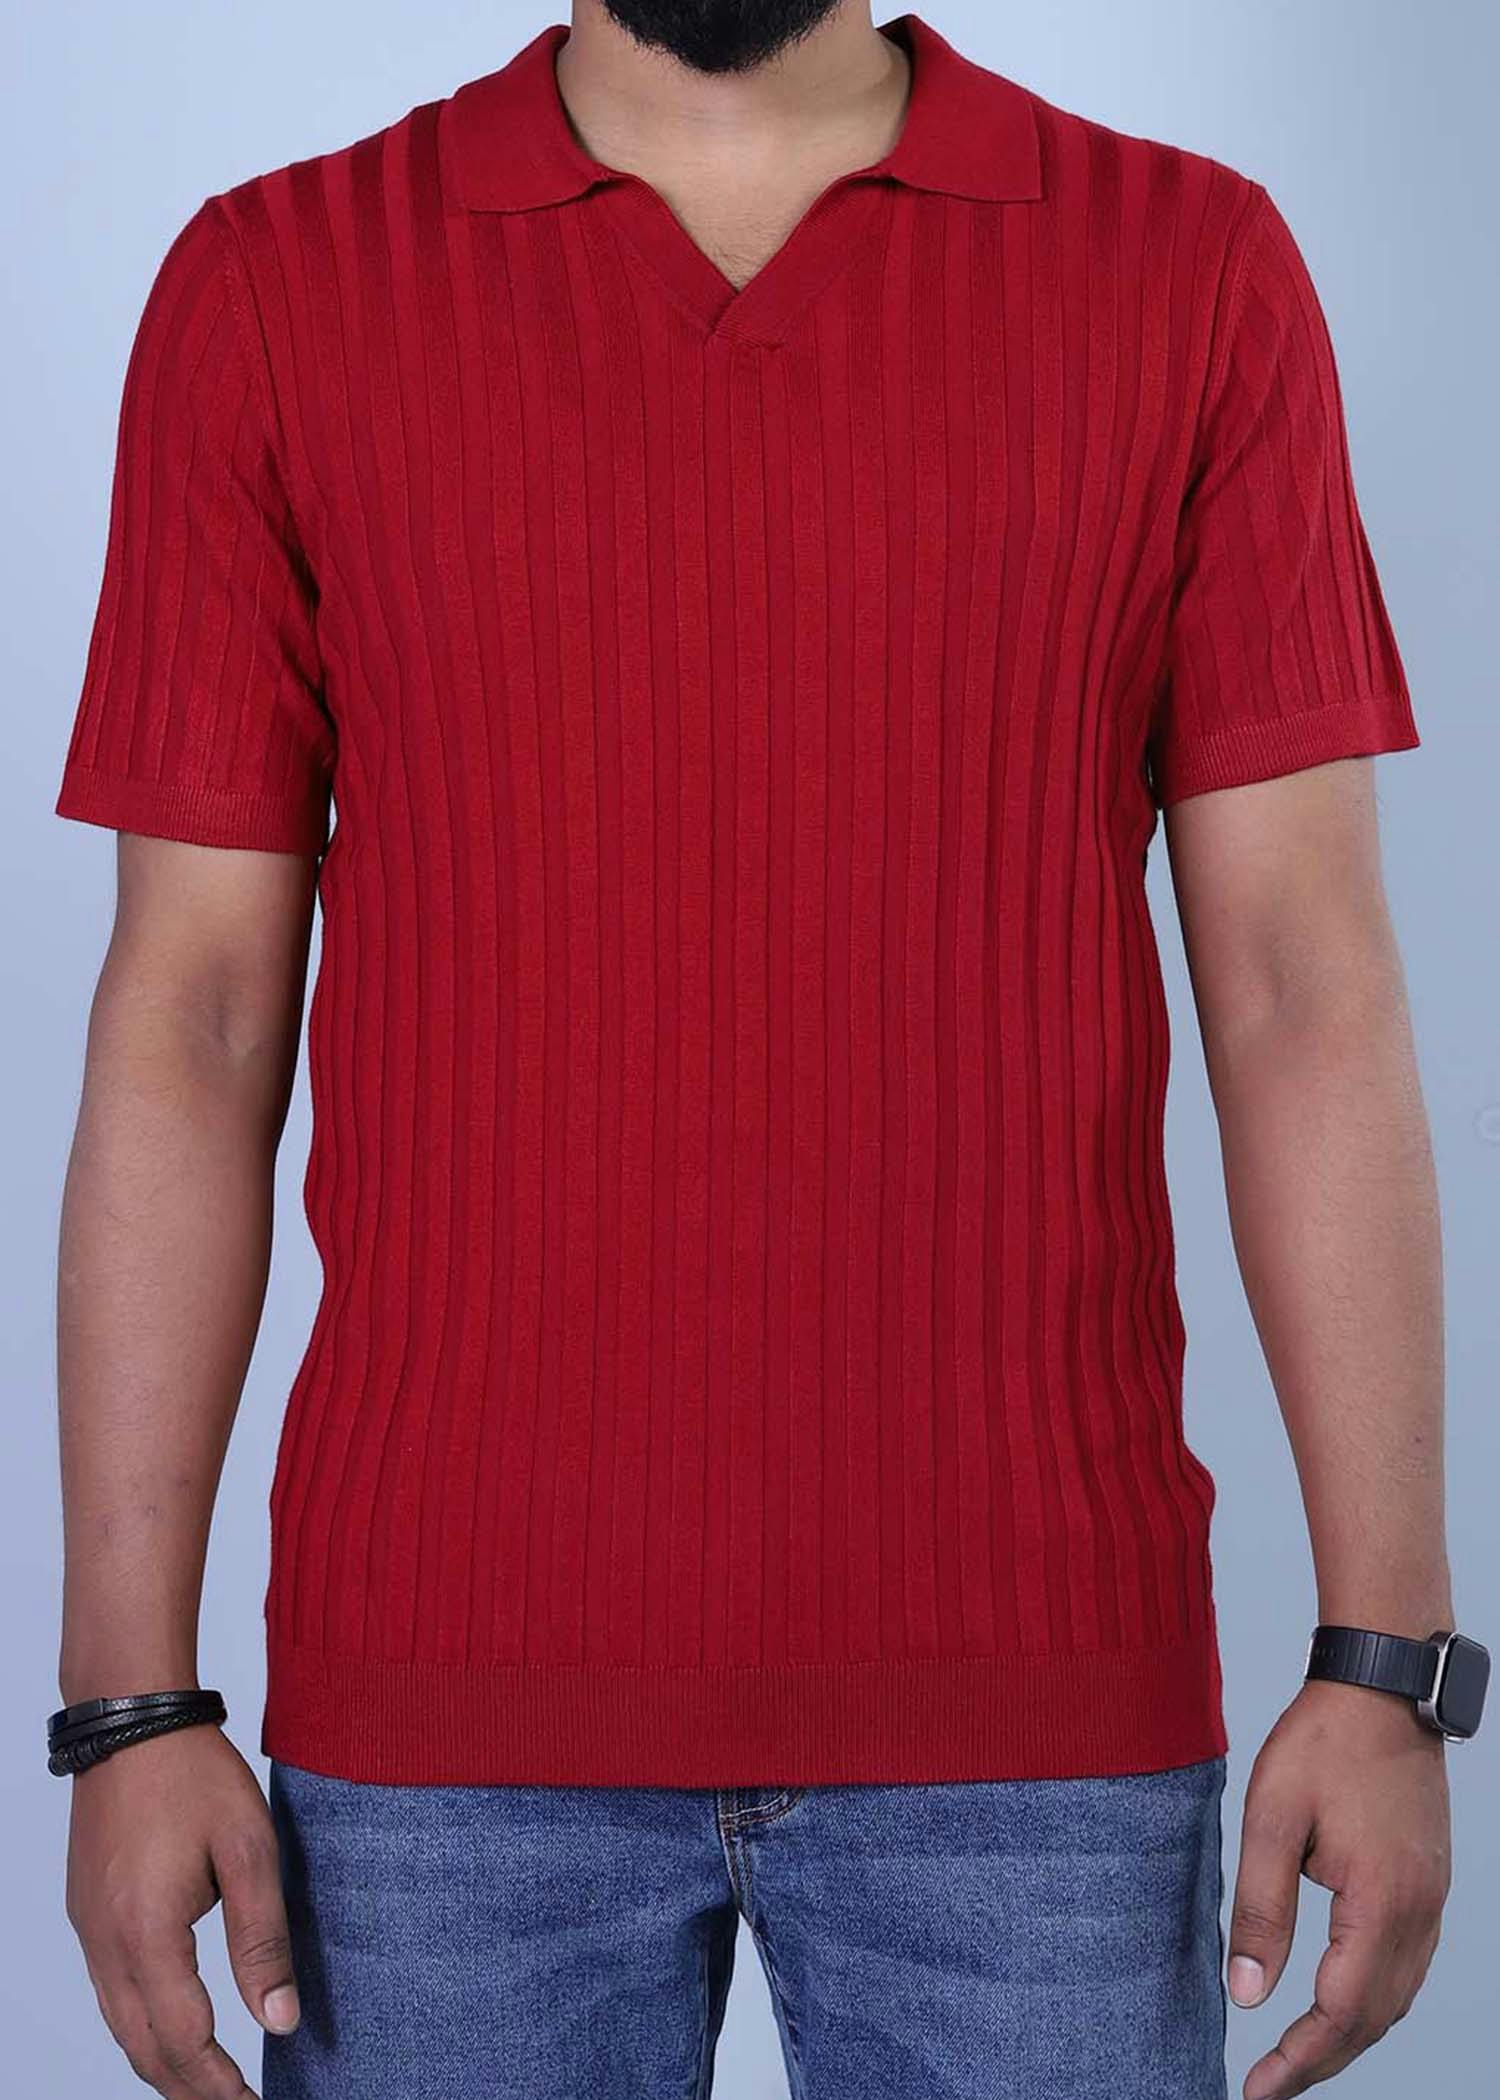 mentana v polo red color half front view